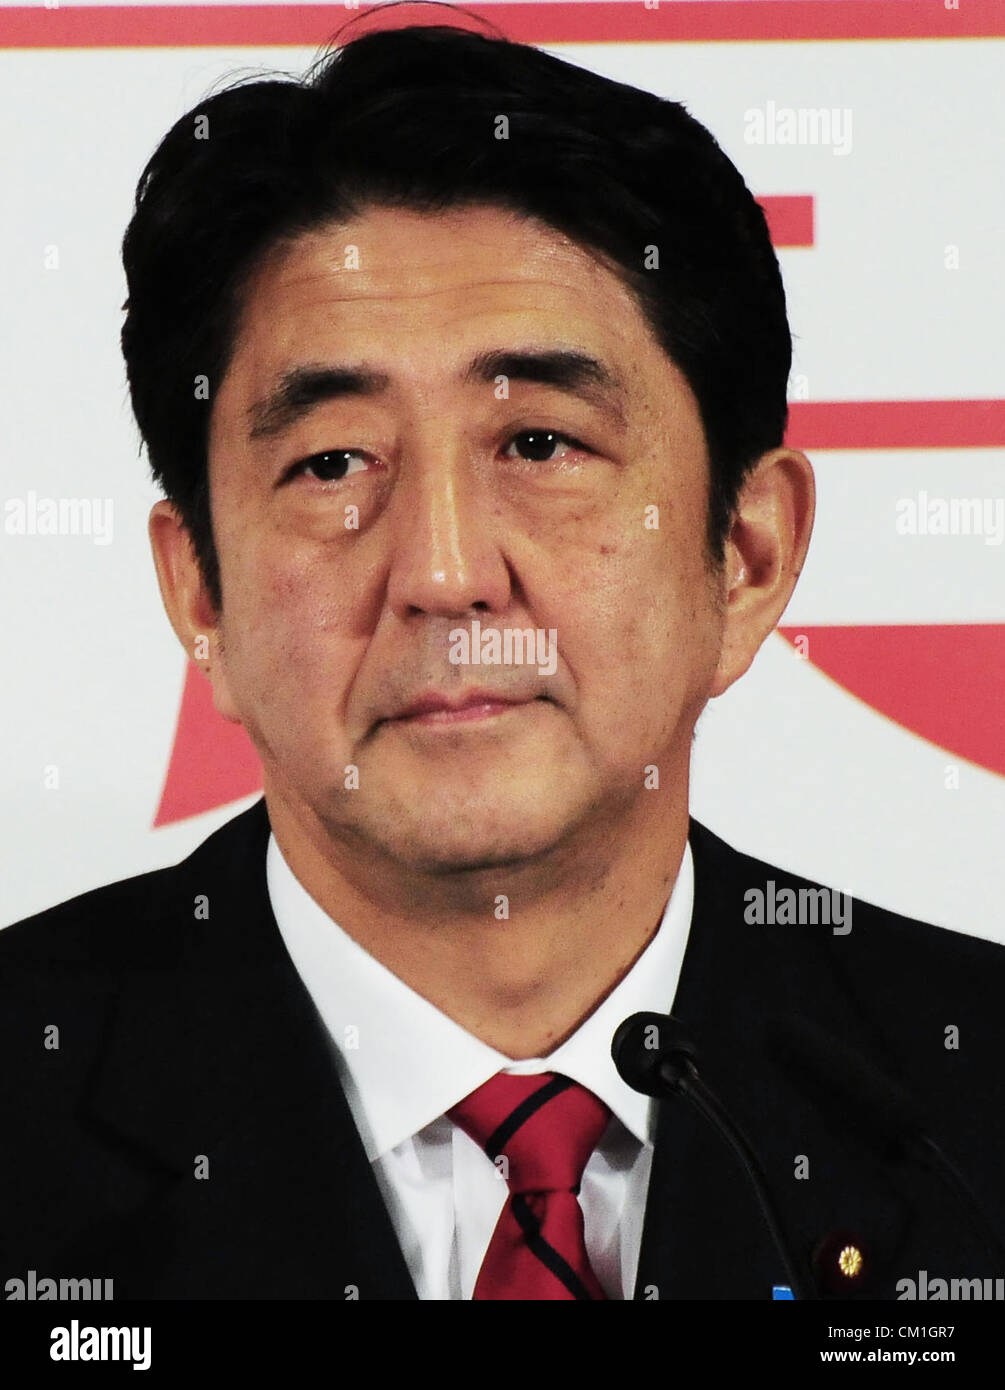 Sept. 14, 2012 - Tokyo, Japan - Former Prime Minister Shinzo Abe attends the ruling Liberal Democratic Party (LDP) in Tokyo, Japan. He will run in the presidential election of the main opposition Liberal Democratic Party on Sept 26th. Stock Photo